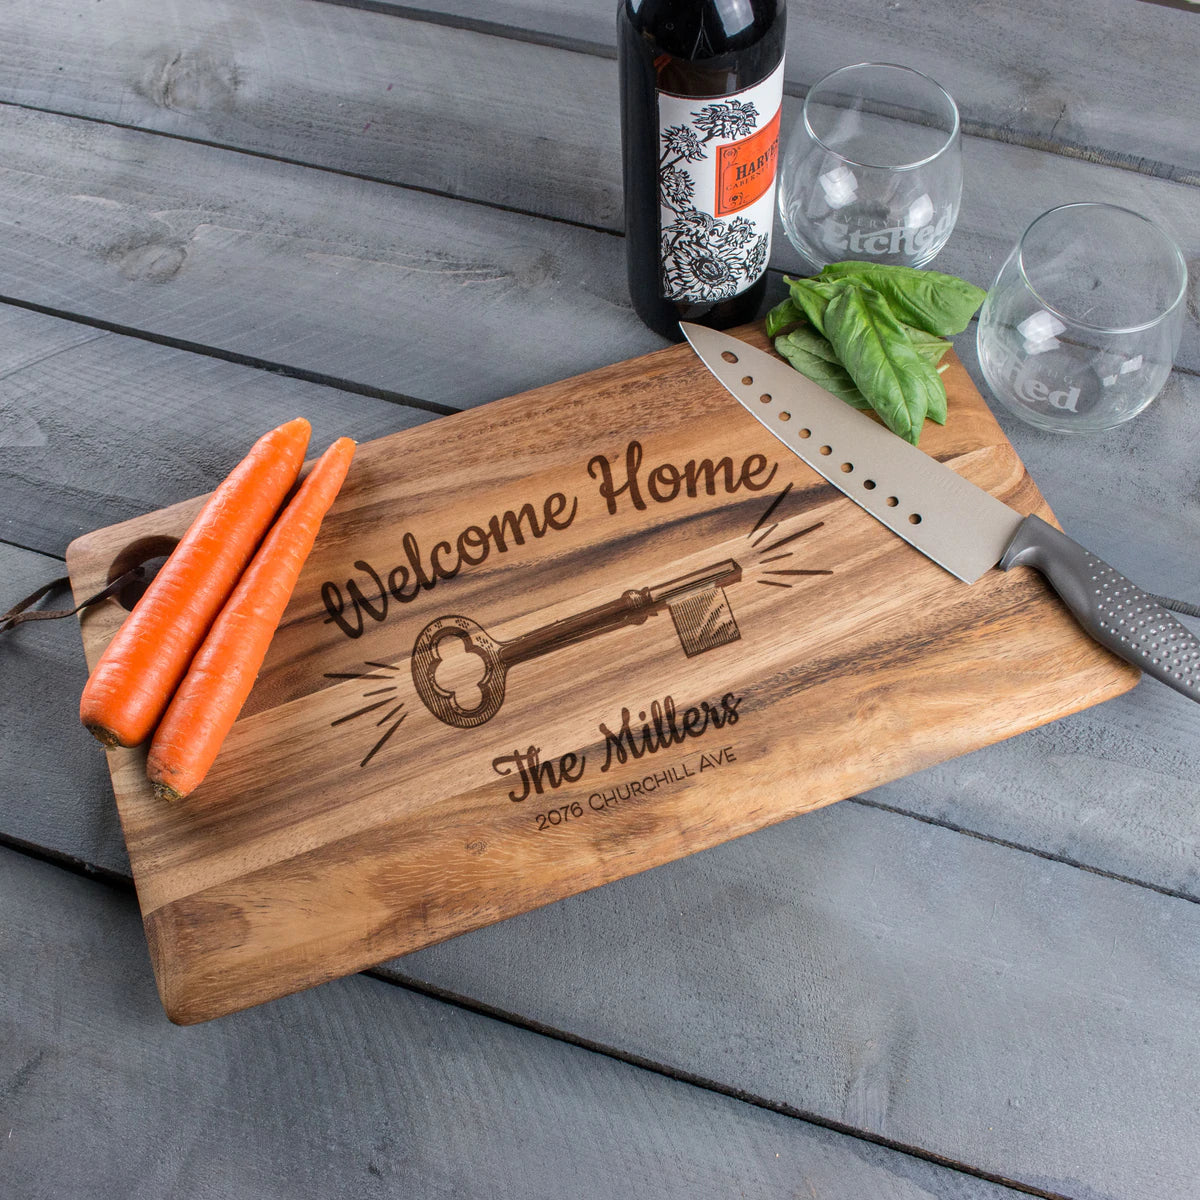 Welcome to our Kitchen glass cutting board Square - designer, decor